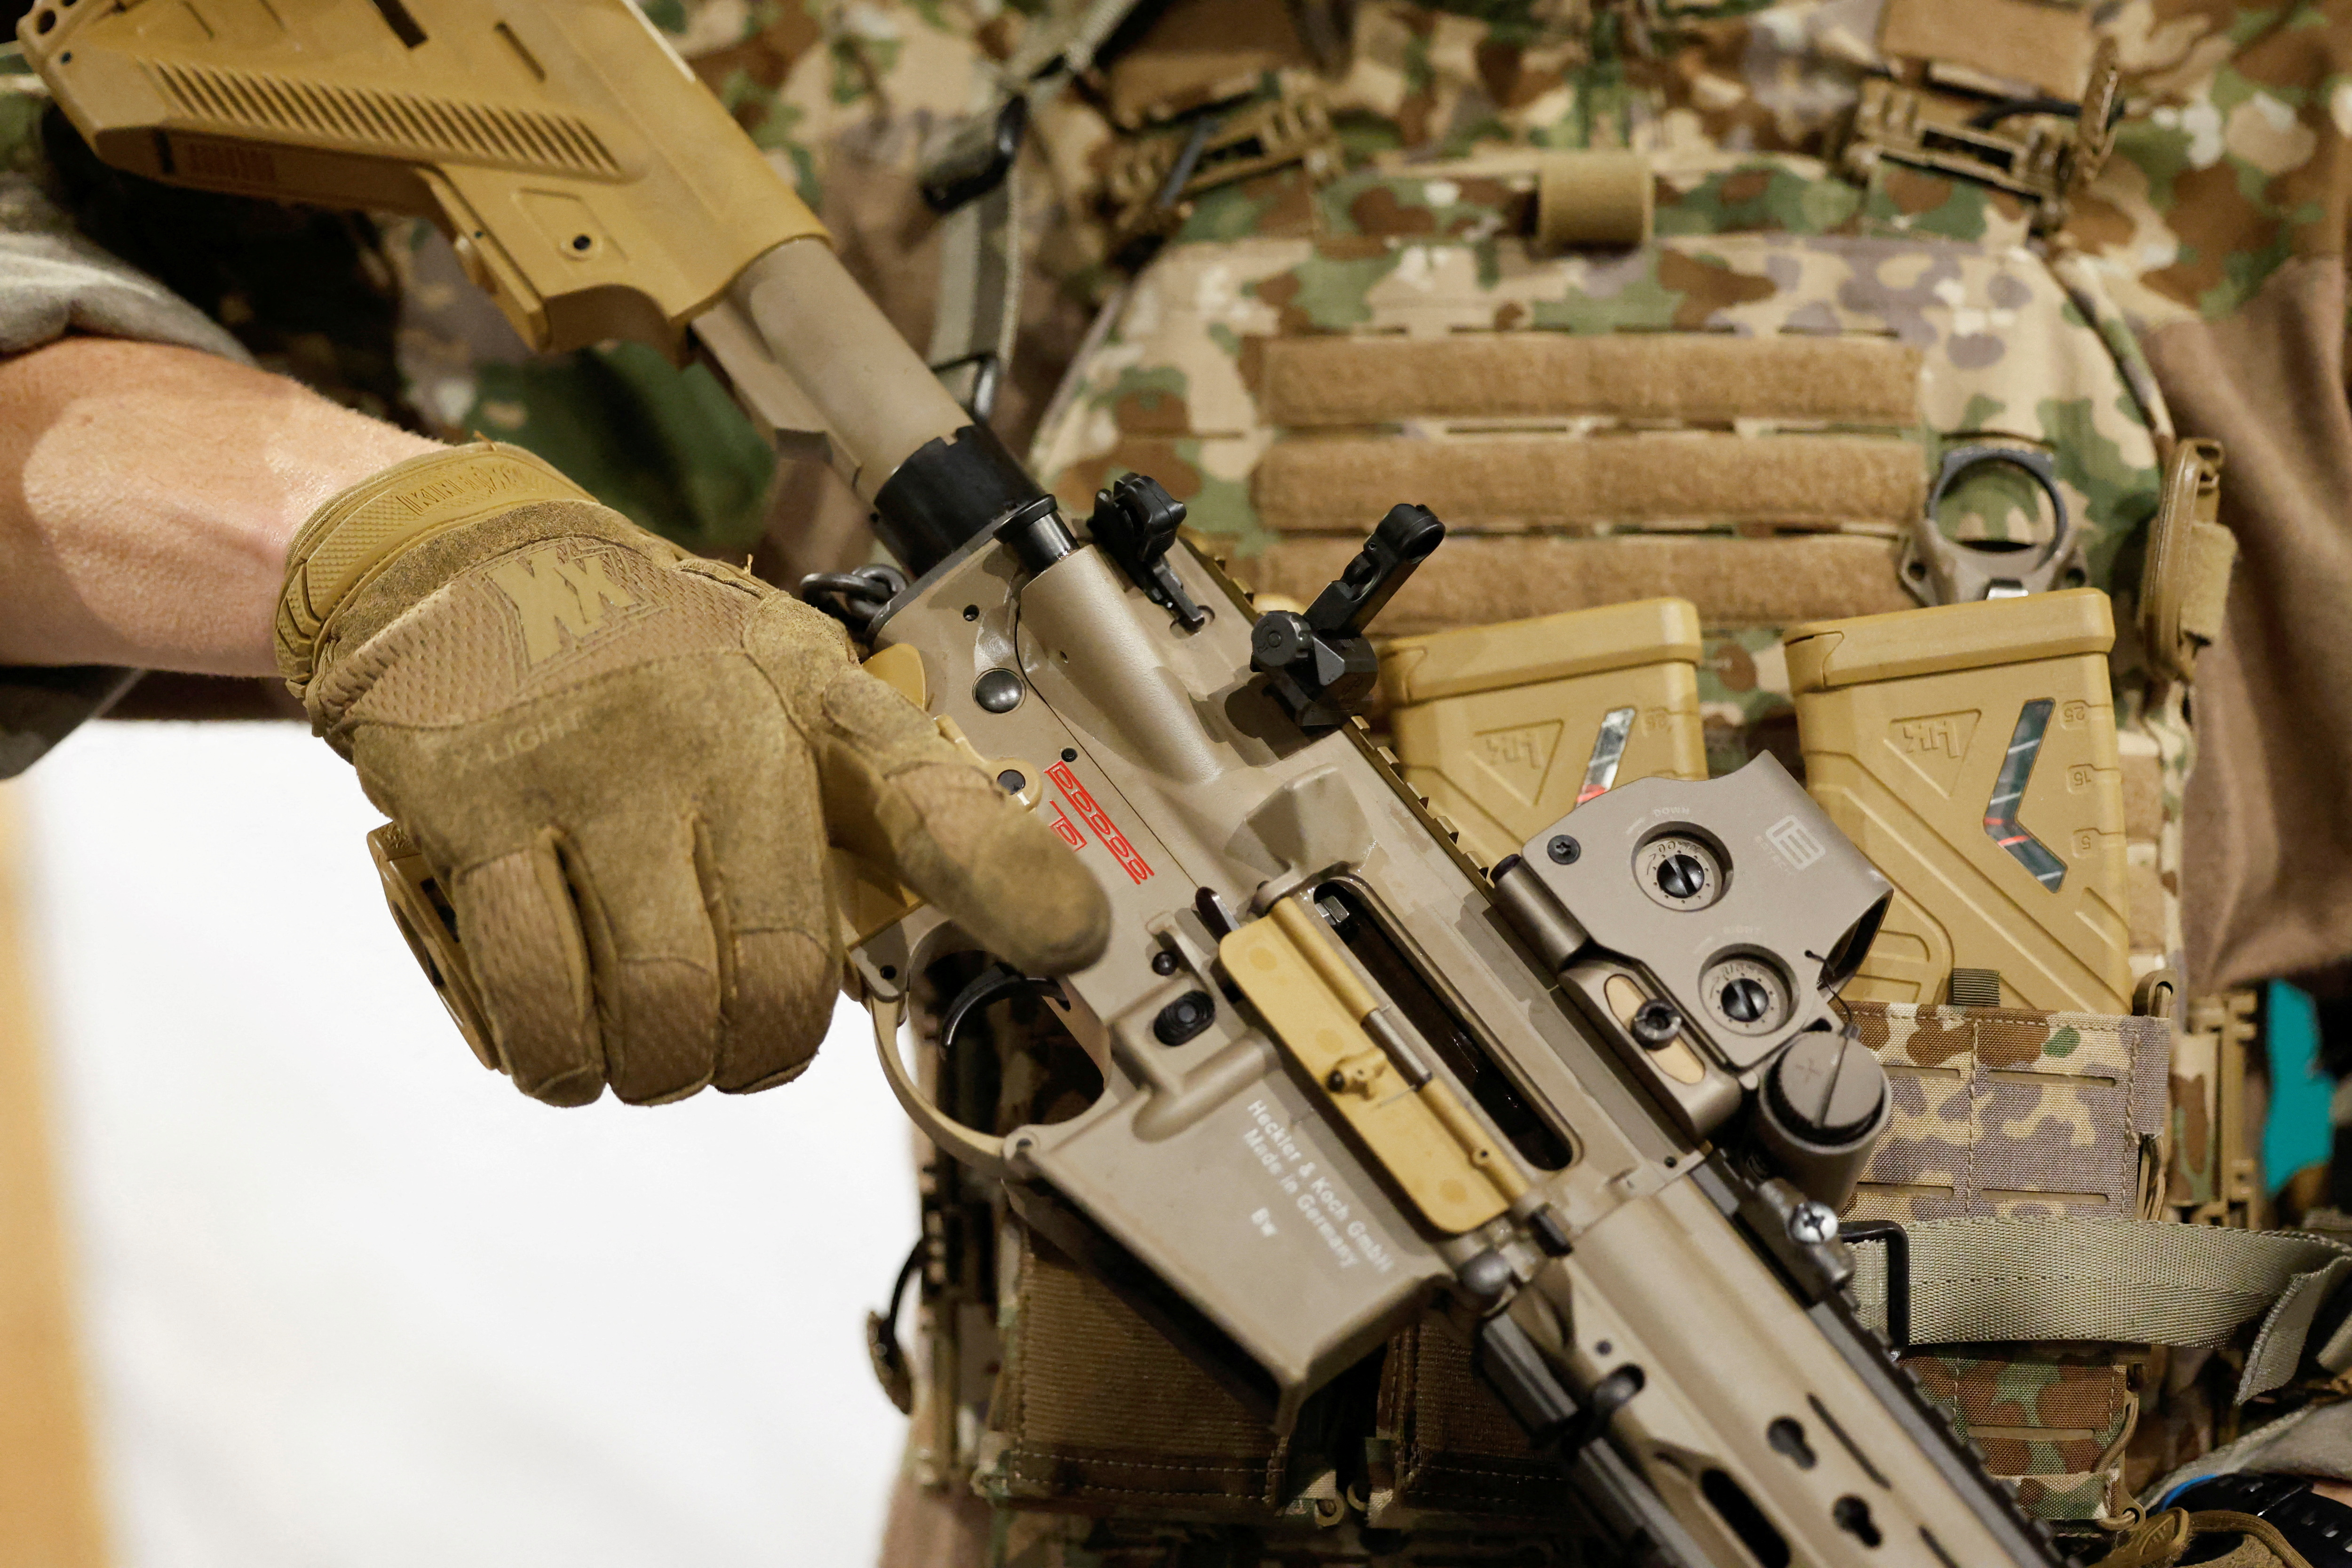 H&K confirms: This is the Army's new and improved sniper rifle